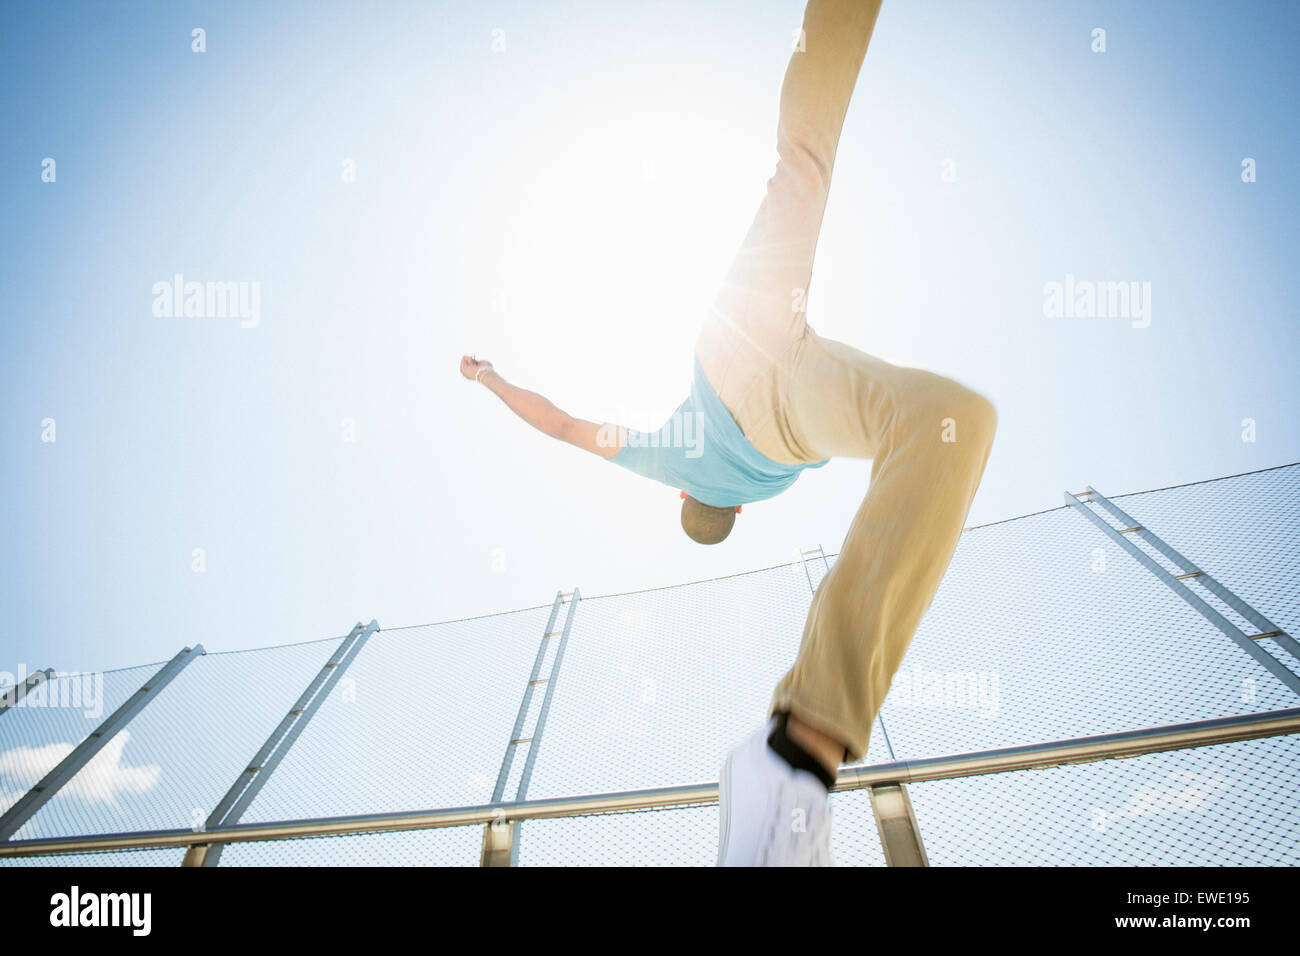 Young man somersaulting parcour parkour free running Stock Photo